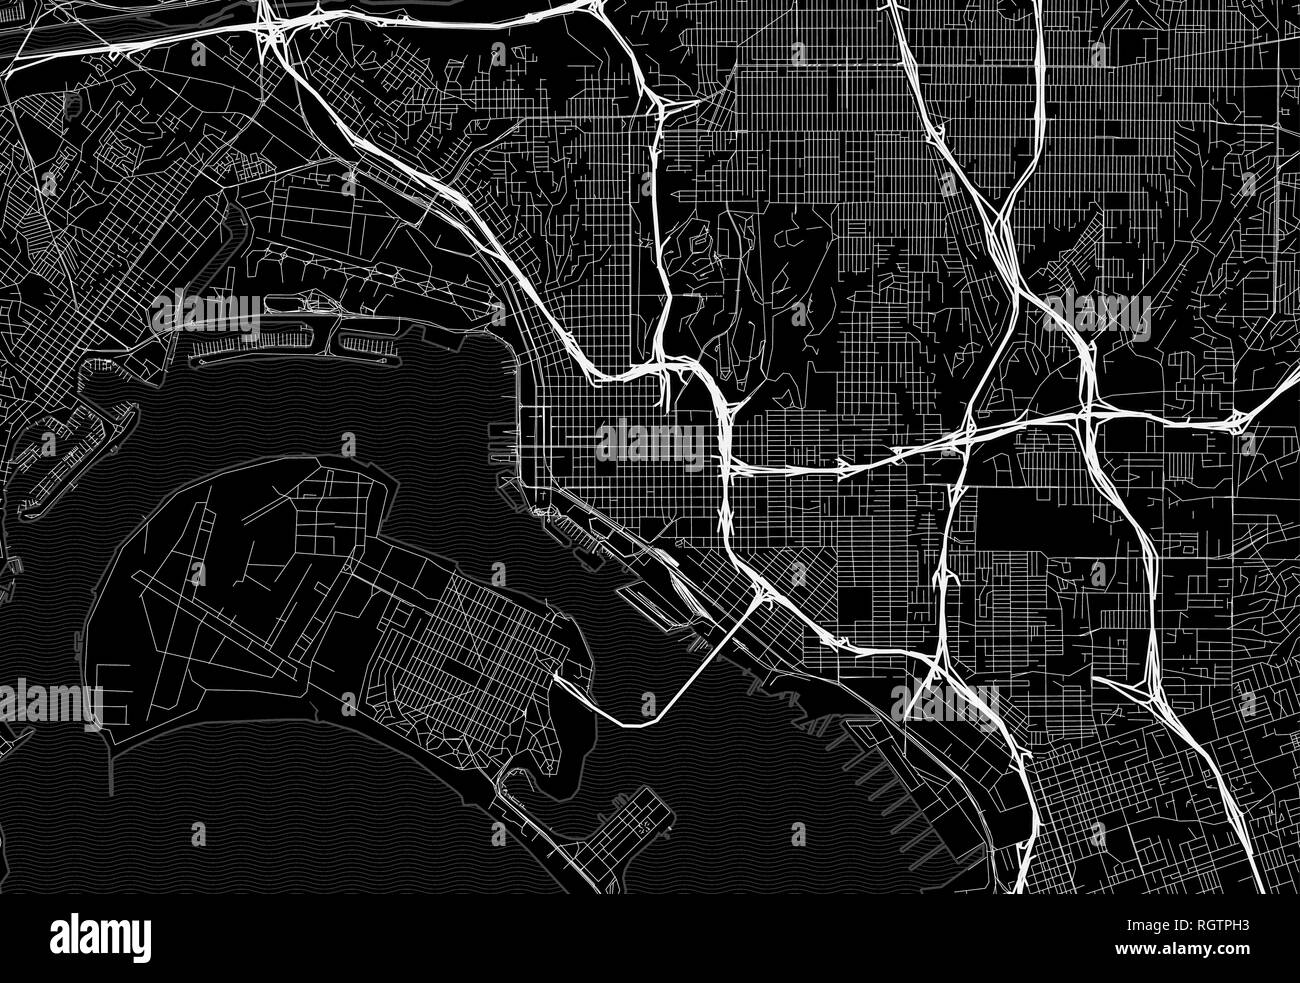 Black map of downtown San Diego, U.S.A. This vector artmap is created as a decorative background or a unique travel sign. Stock Vector